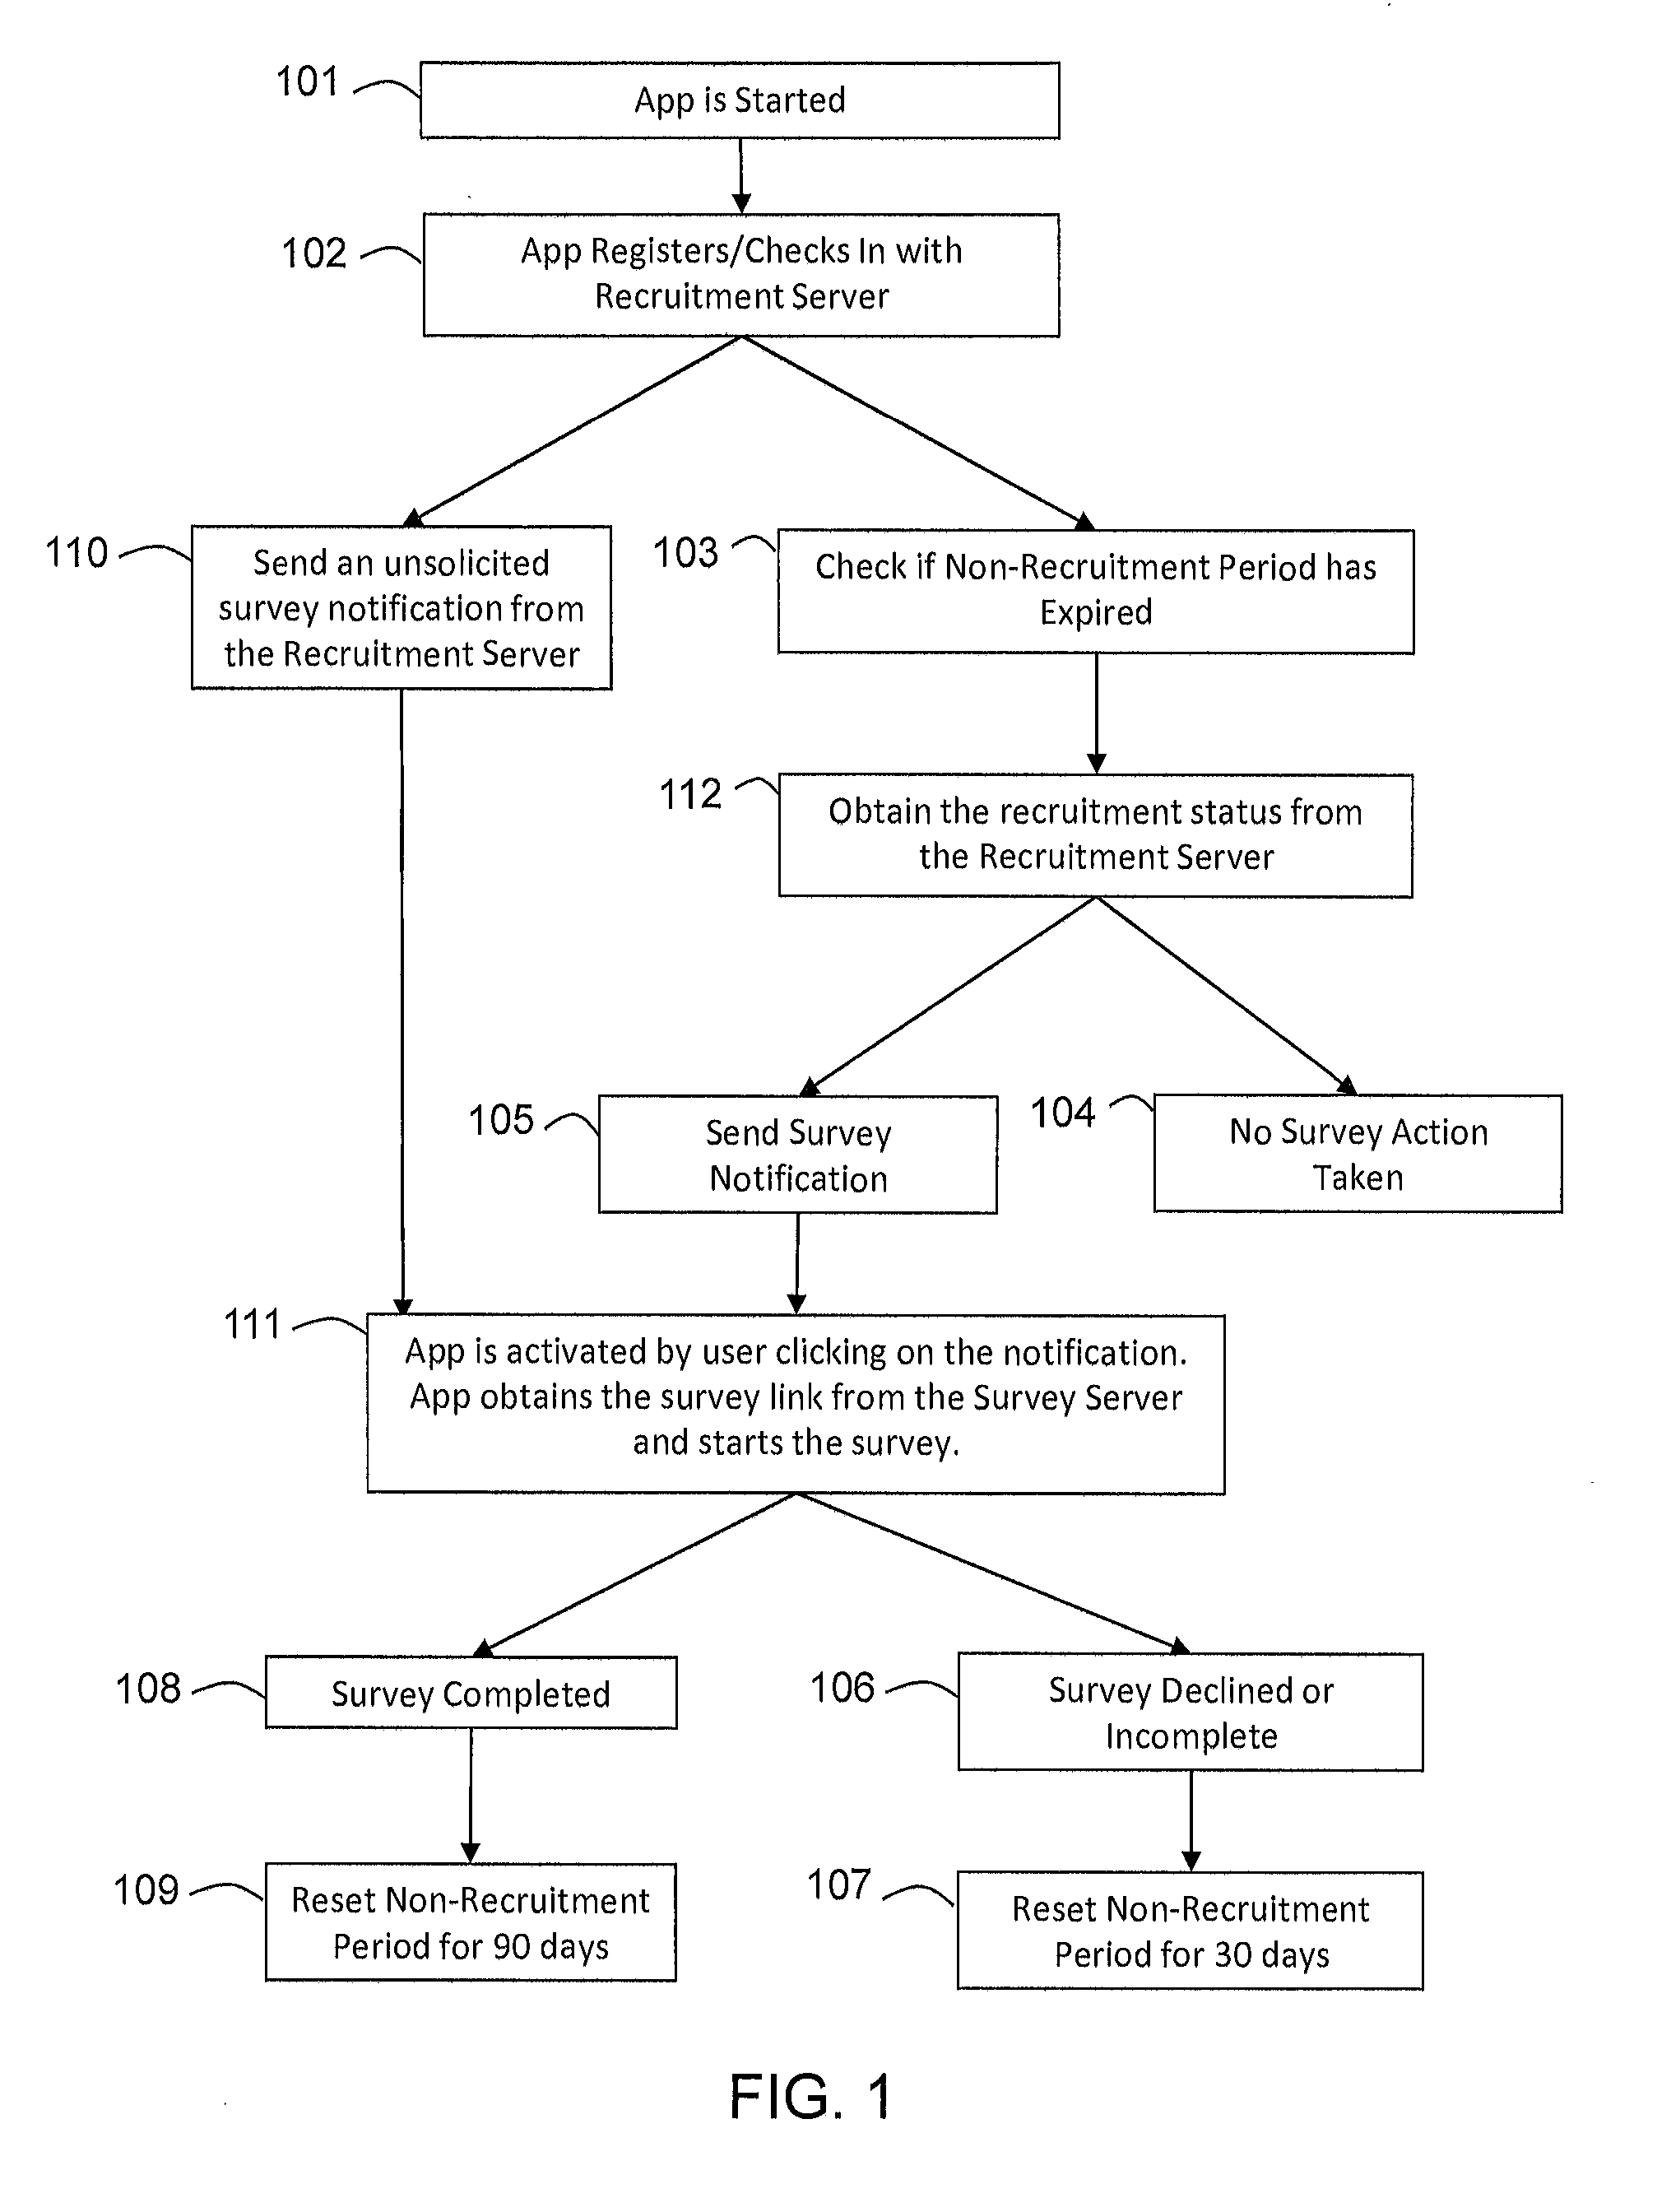 System and method for recruiting mobile app users to participate in surveys